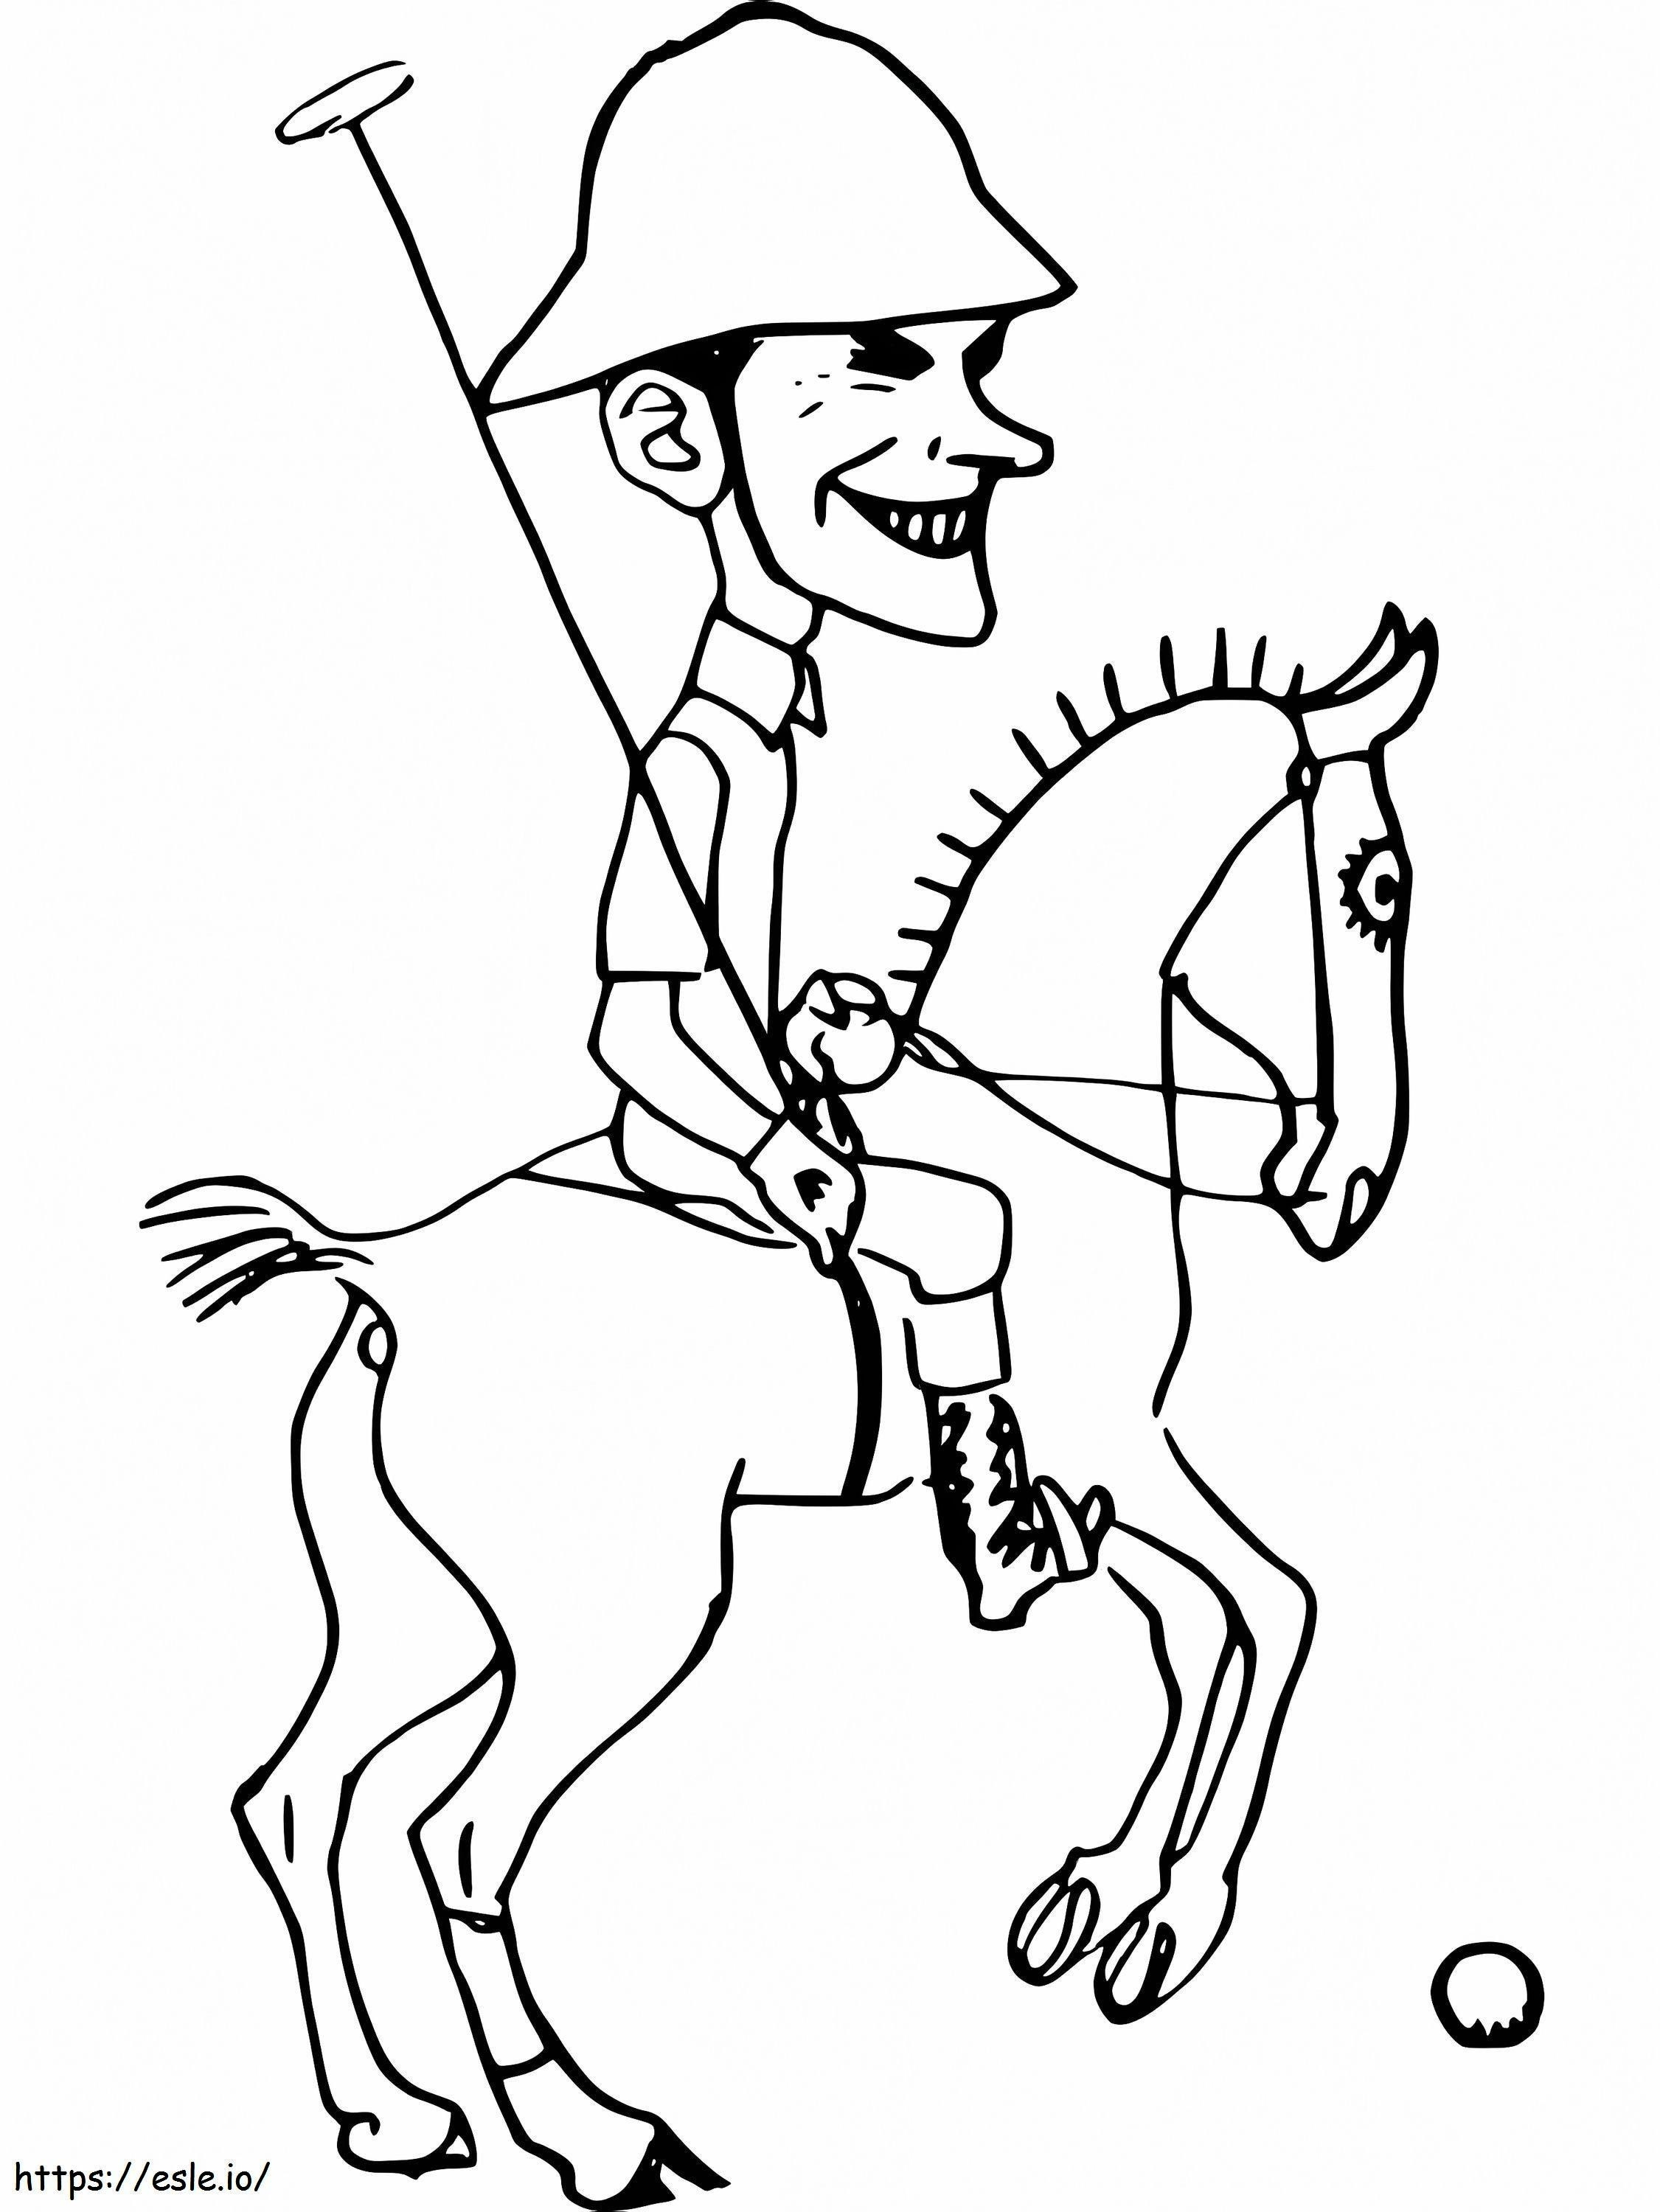 Vintage Playing Polo coloring page